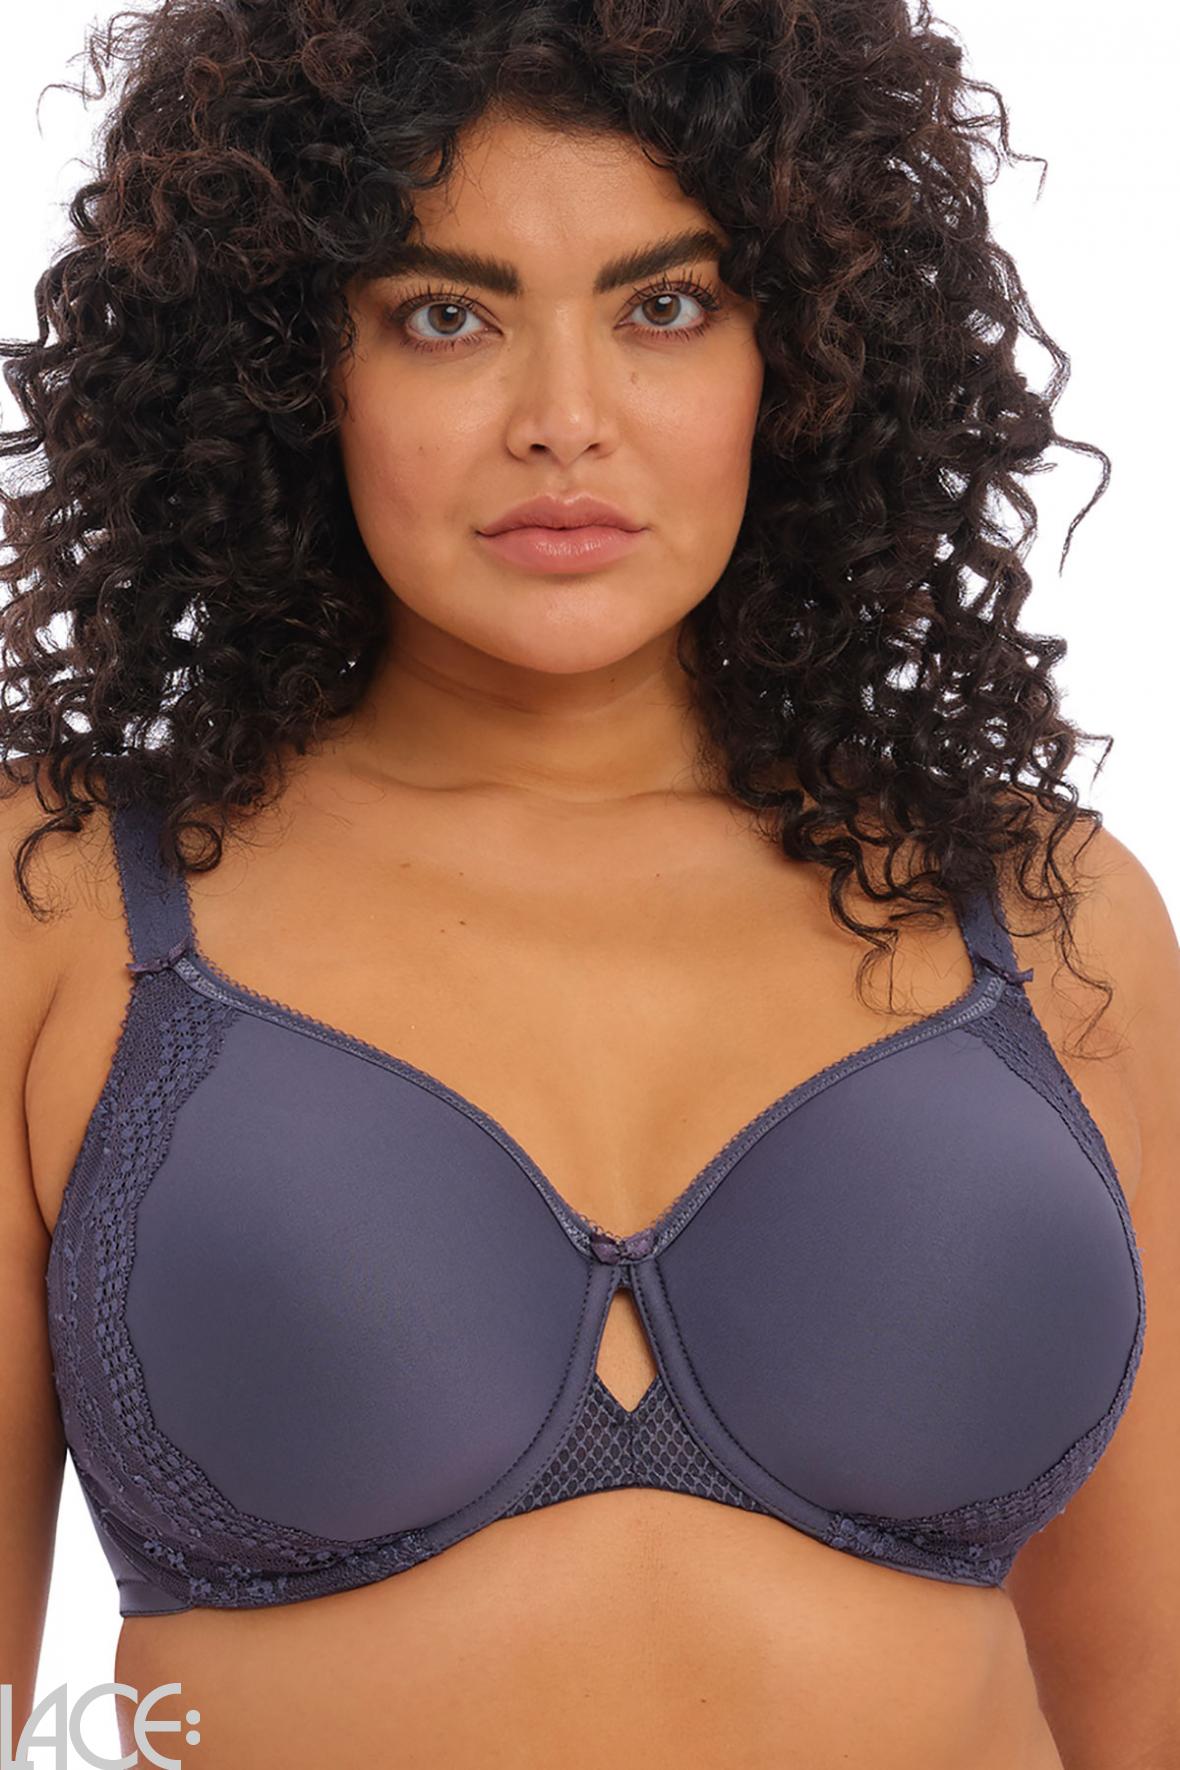 Elomi Charley T-shirt Spacer bra G-L cup STORM –